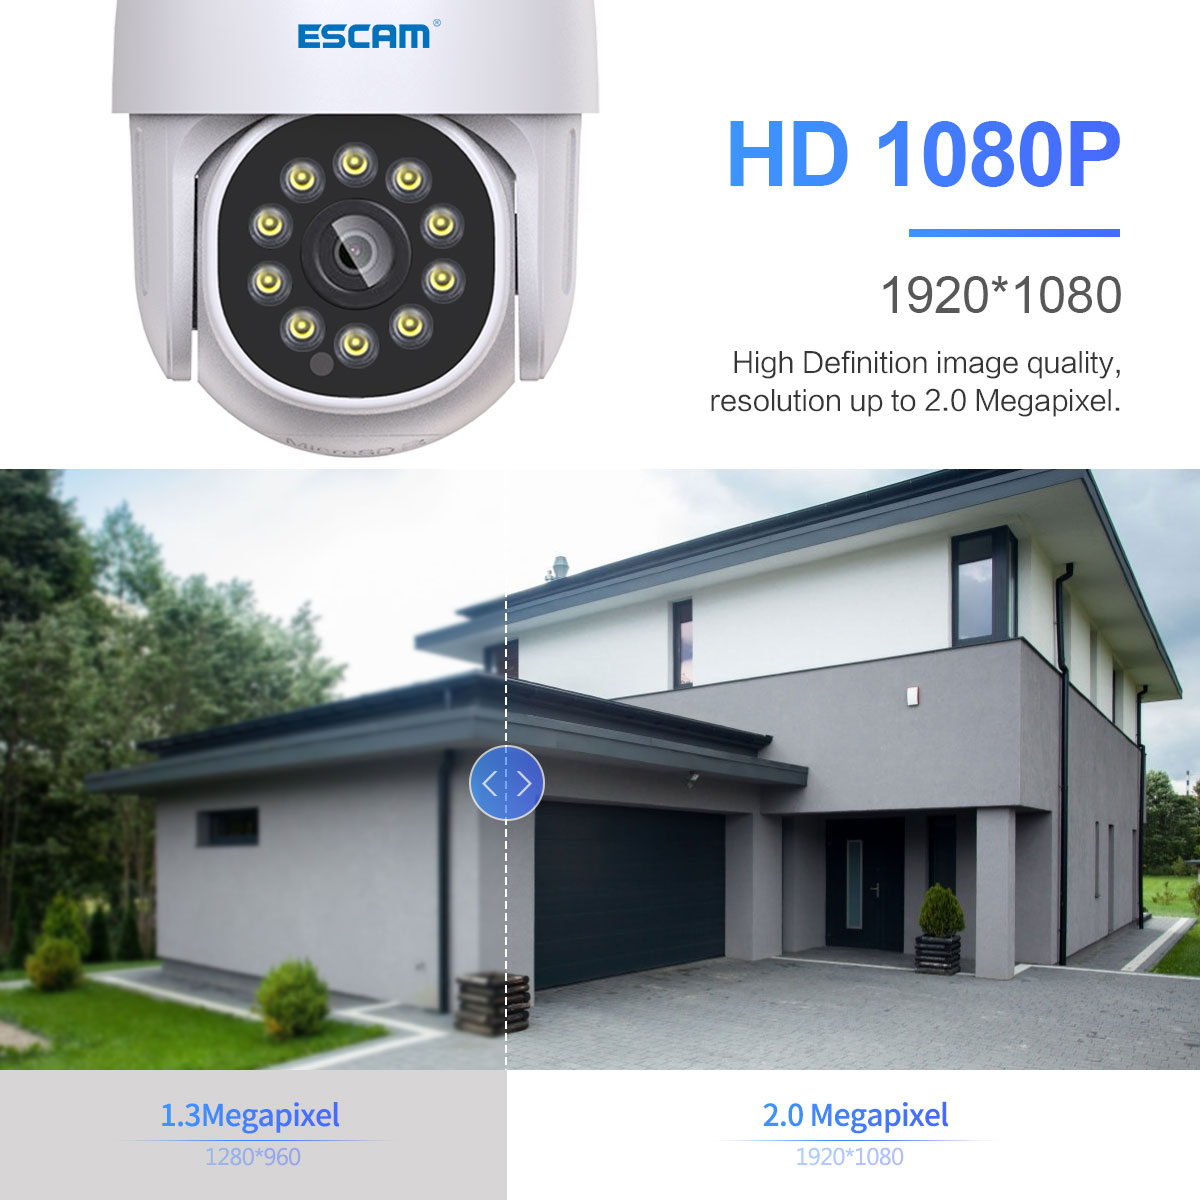 ESCAM-PT202-1080P-WiFi-IP-Camera-Infrared-Night-Vision-Waterproof-With-Motions-Detection-And-Automat-1784296-3